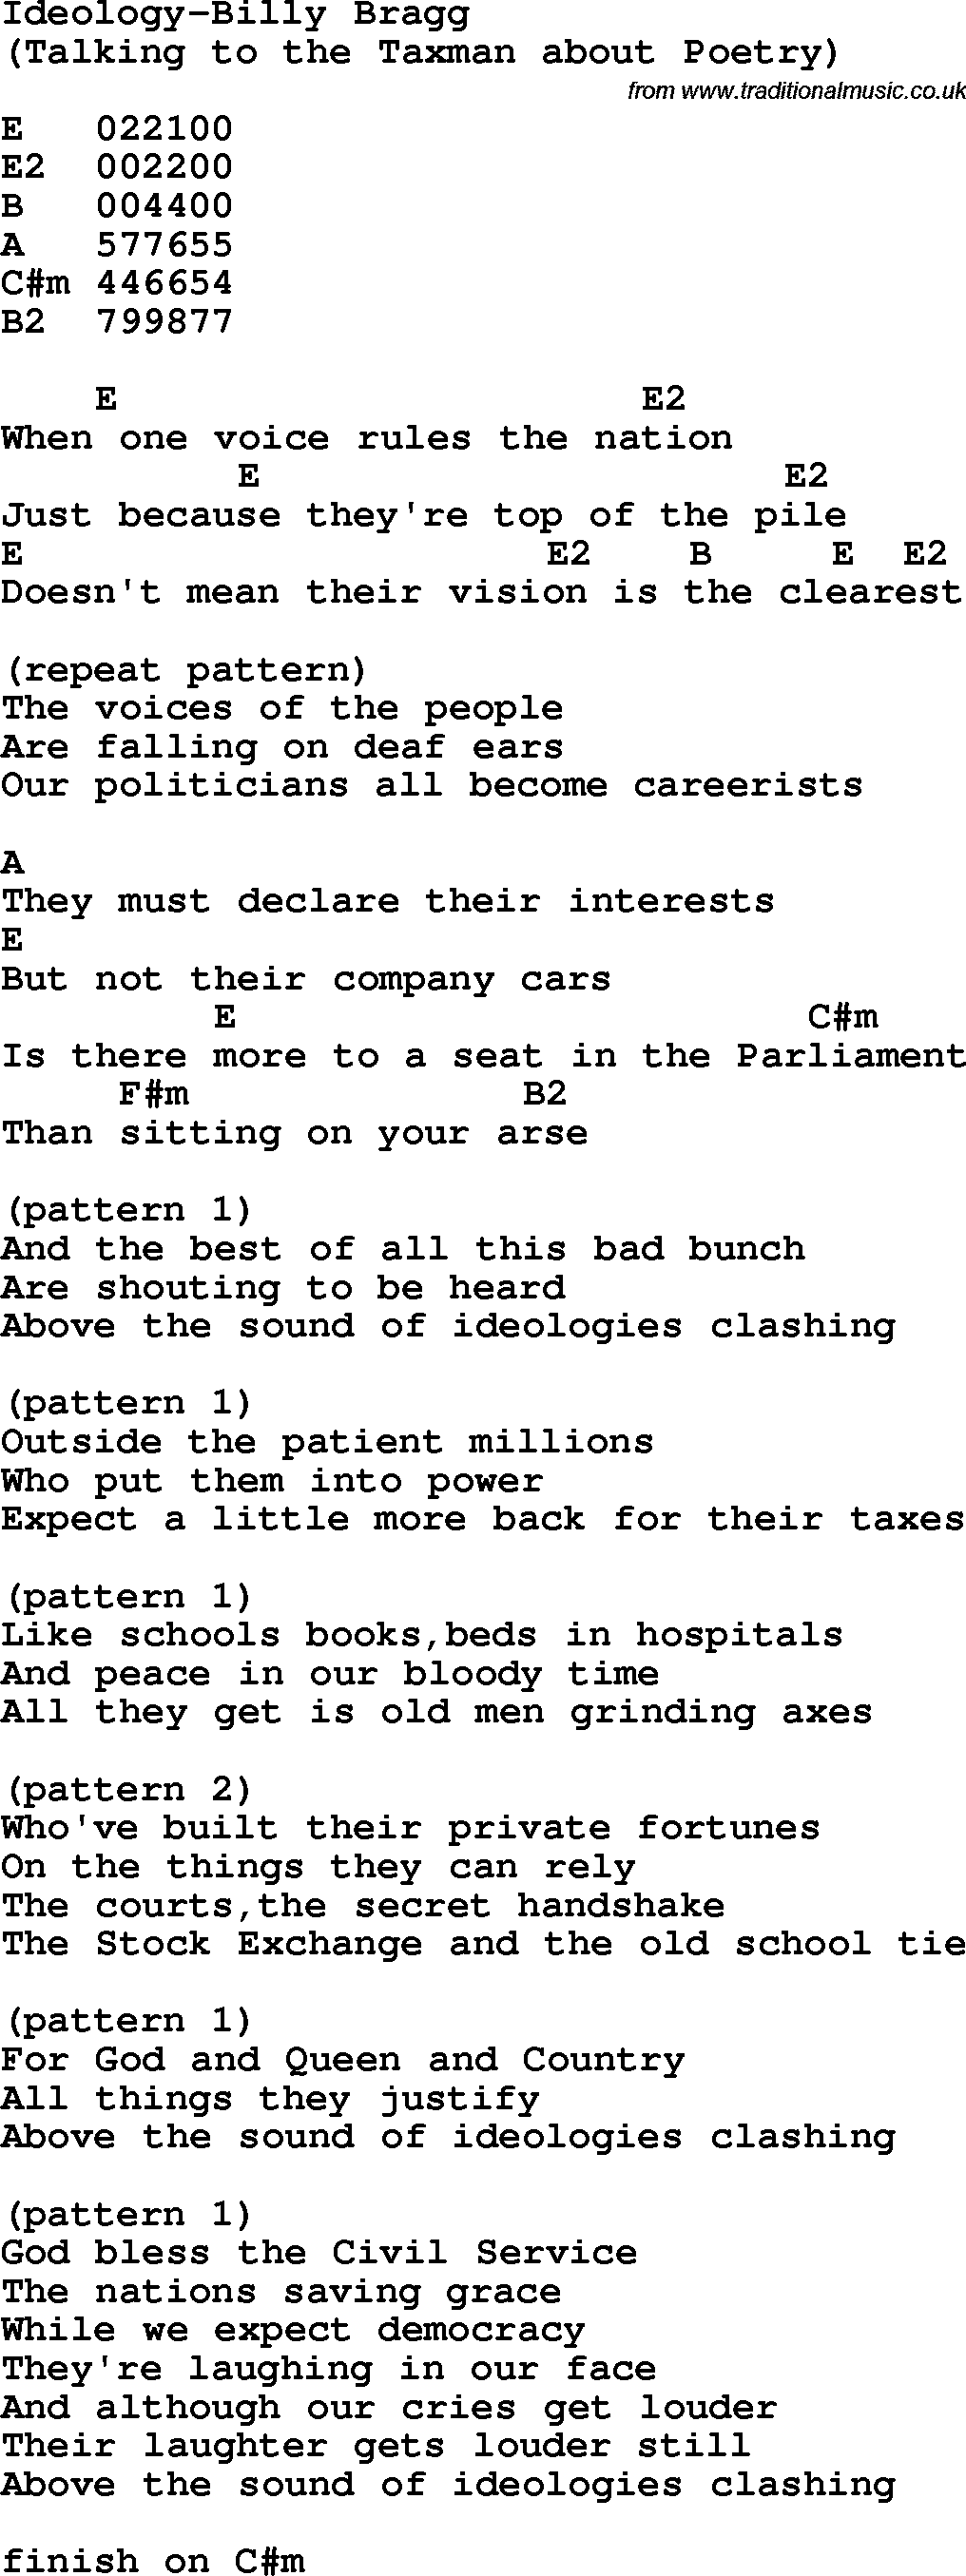 Protest Song Ideology-Billy Bragg lyrics and chords